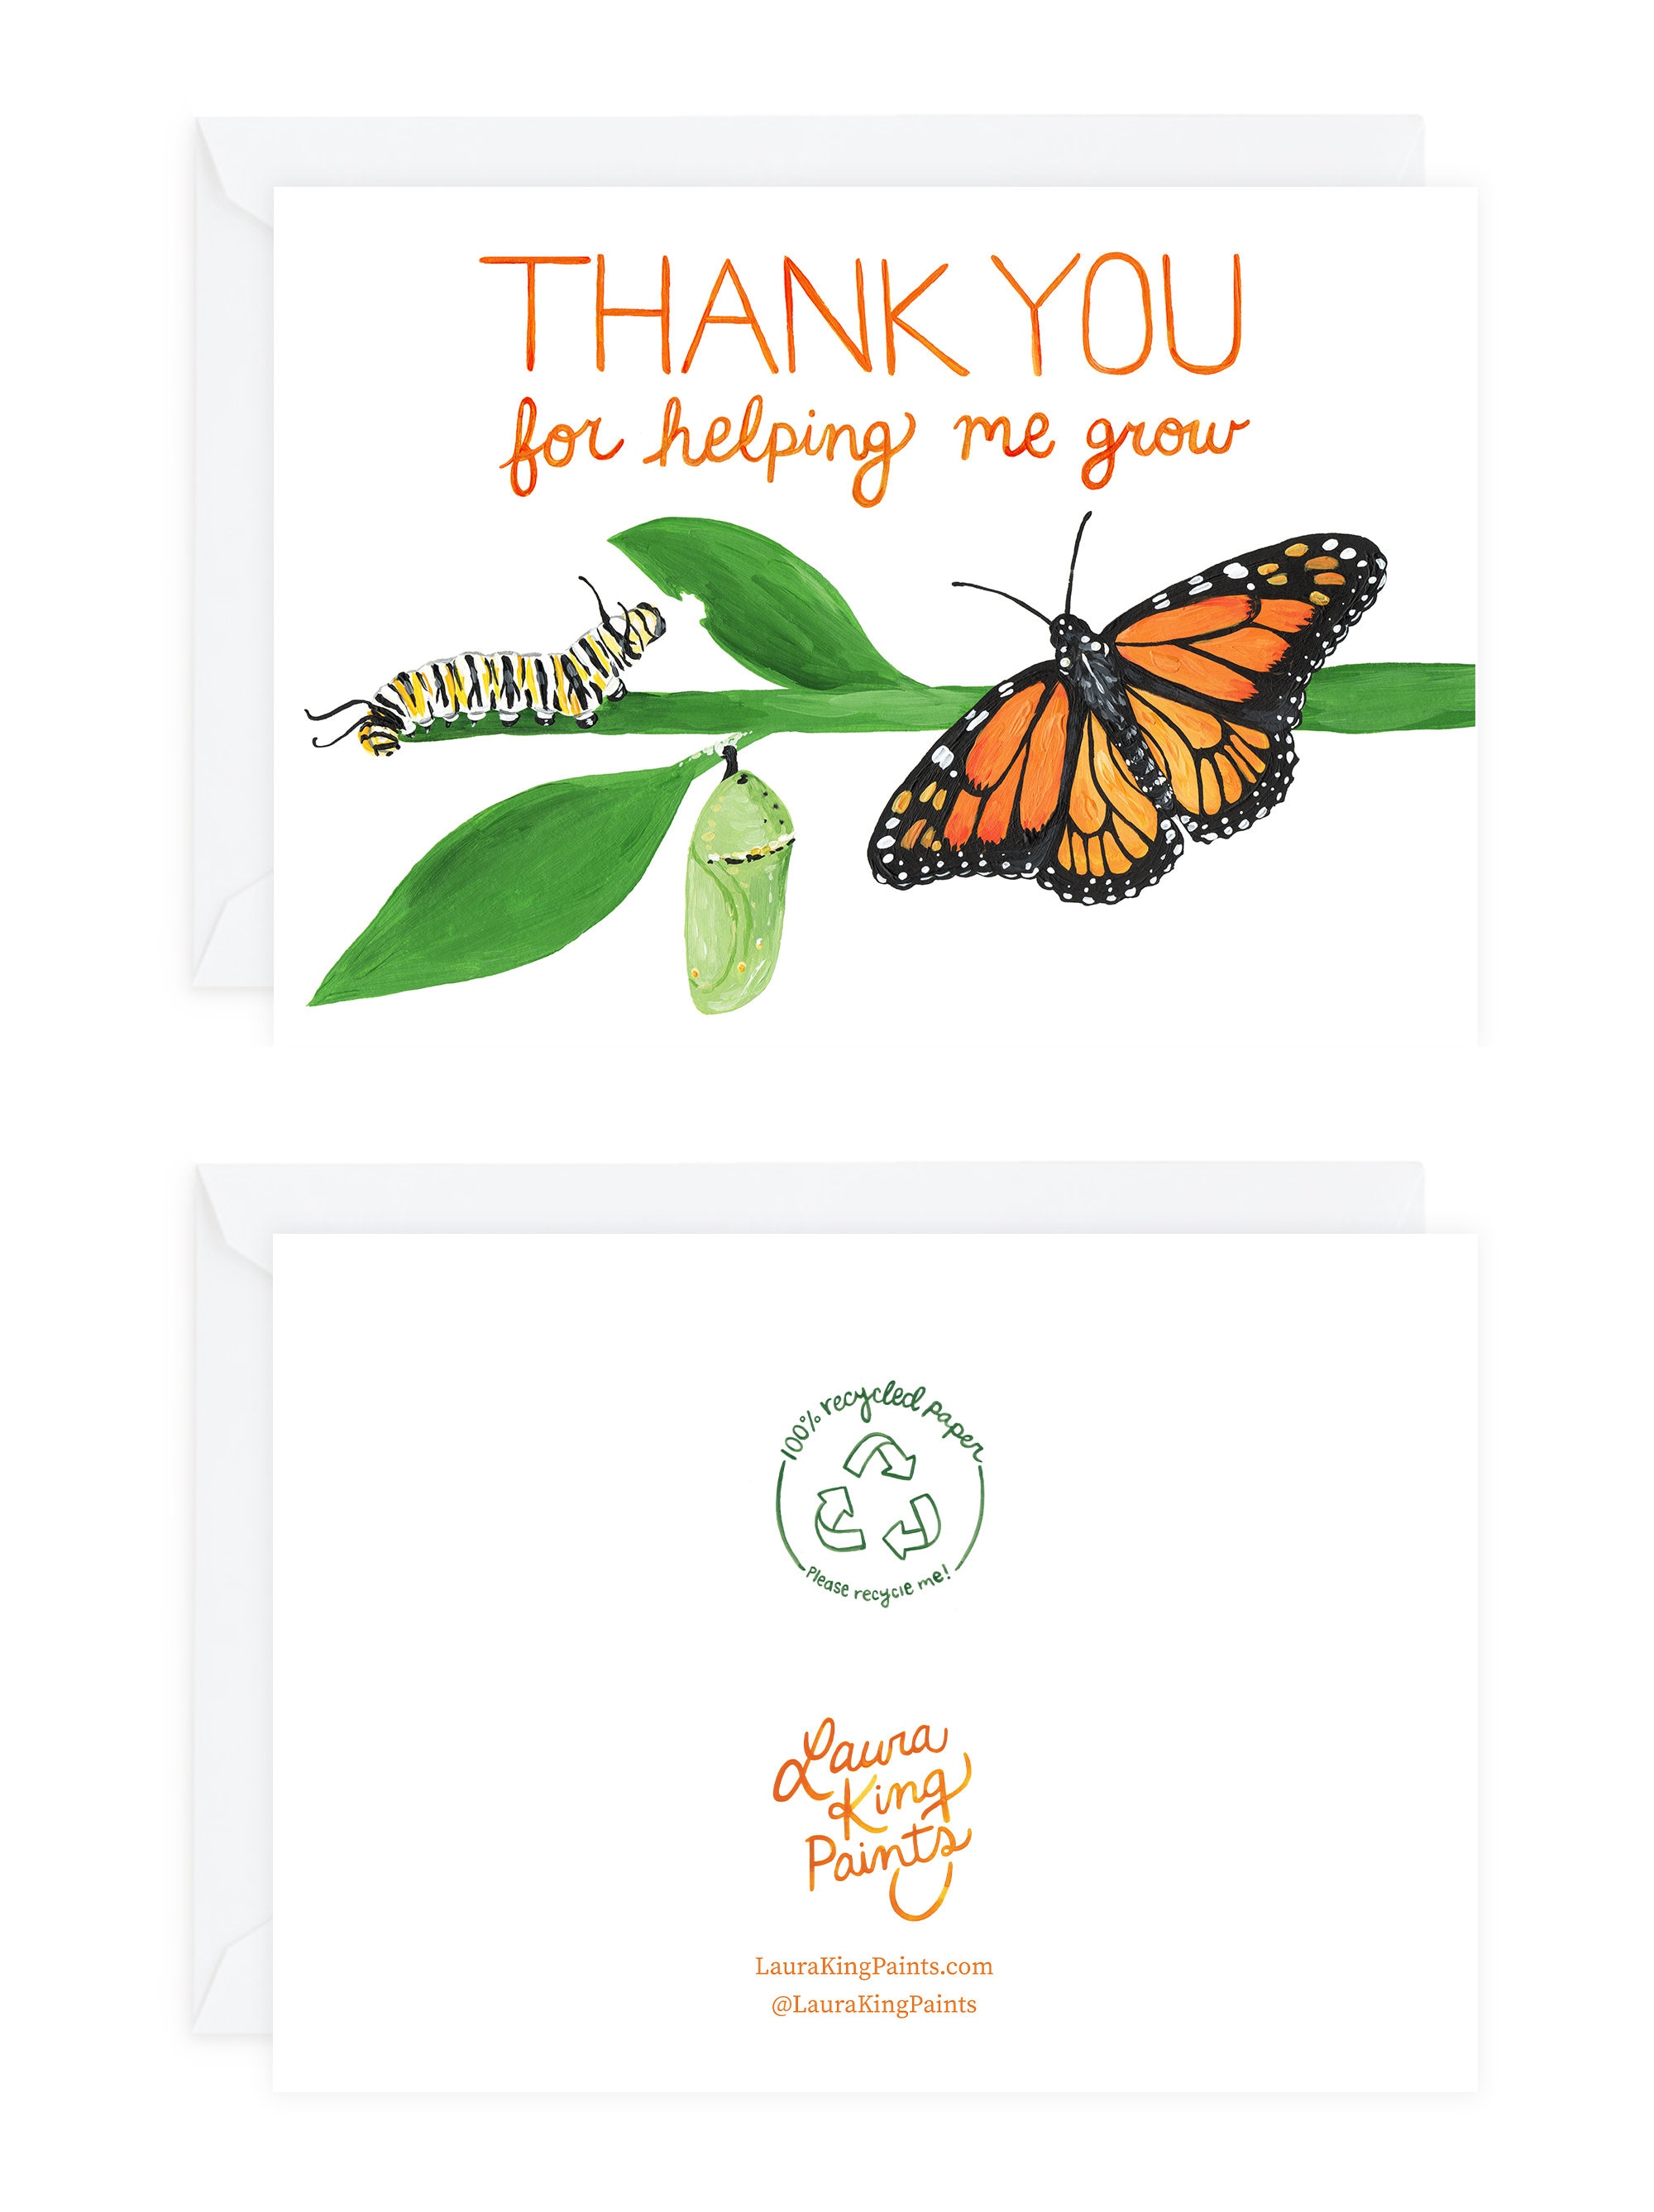 Thank You Card Personalizzate Cocoon